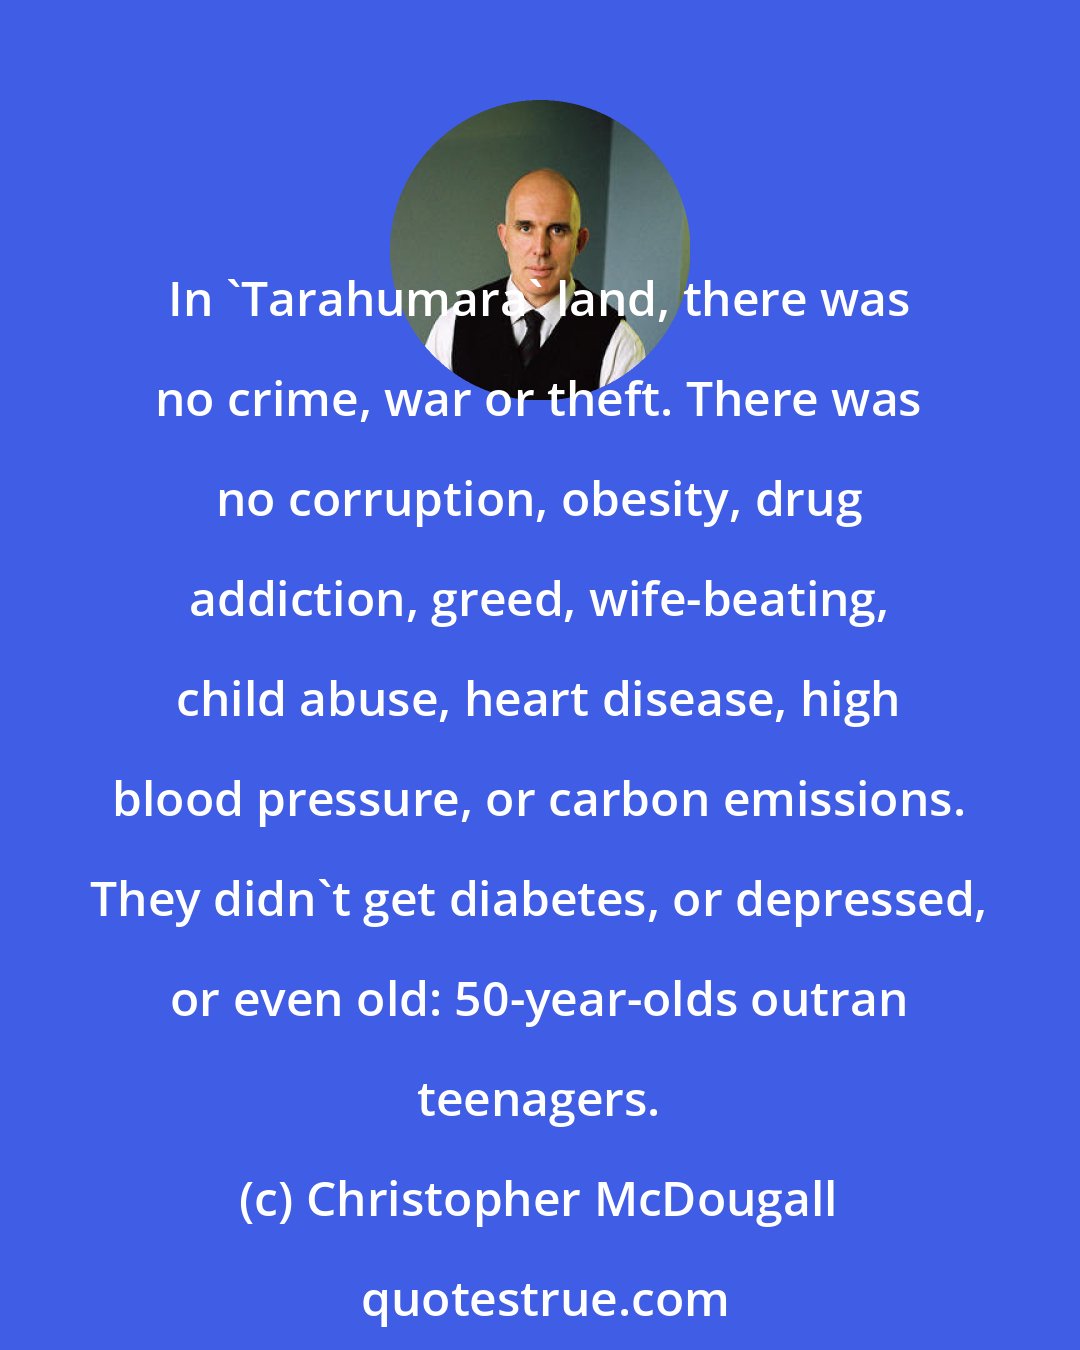 Christopher McDougall: In 'Tarahumara' land, there was no crime, war or theft. There was no corruption, obesity, drug addiction, greed, wife-beating, child abuse, heart disease, high blood pressure, or carbon emissions. They didn't get diabetes, or depressed, or even old: 50-year-olds outran teenagers.